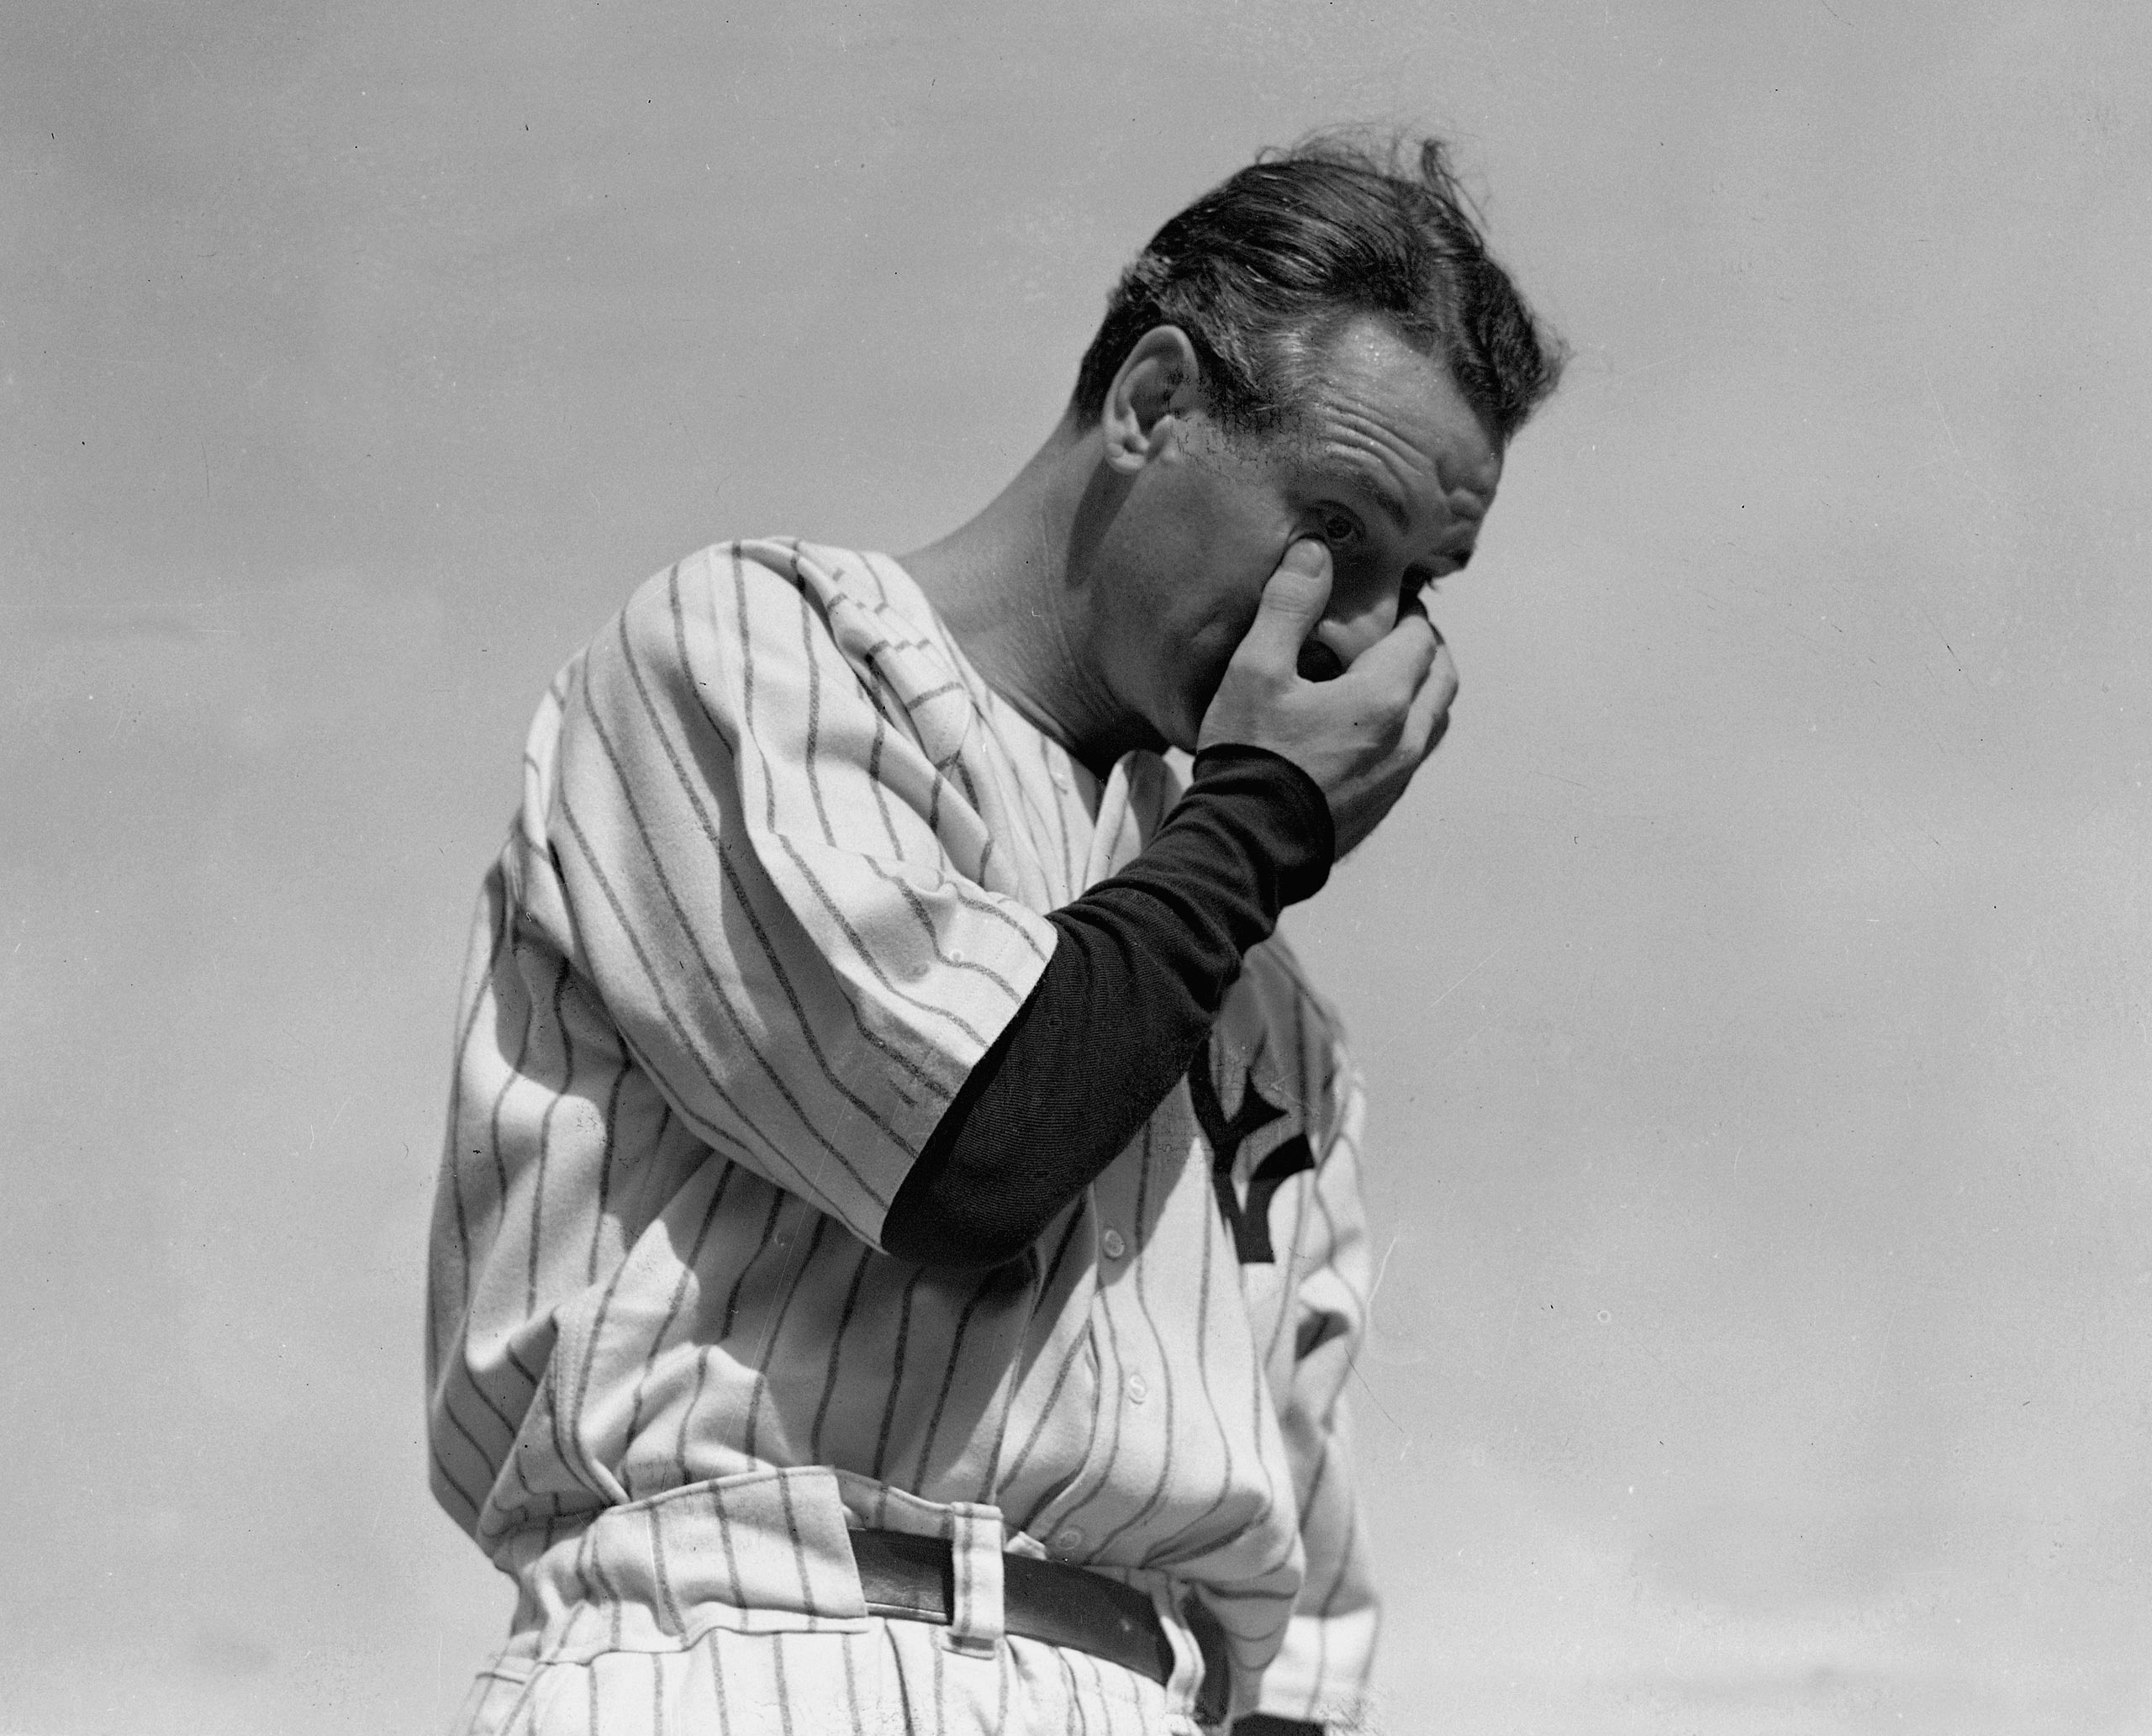 New York Yankees' Lou Gehrig wipes away a tear while speaking during a sold-out tribute at Yankee Stadium on July 4, 1939.